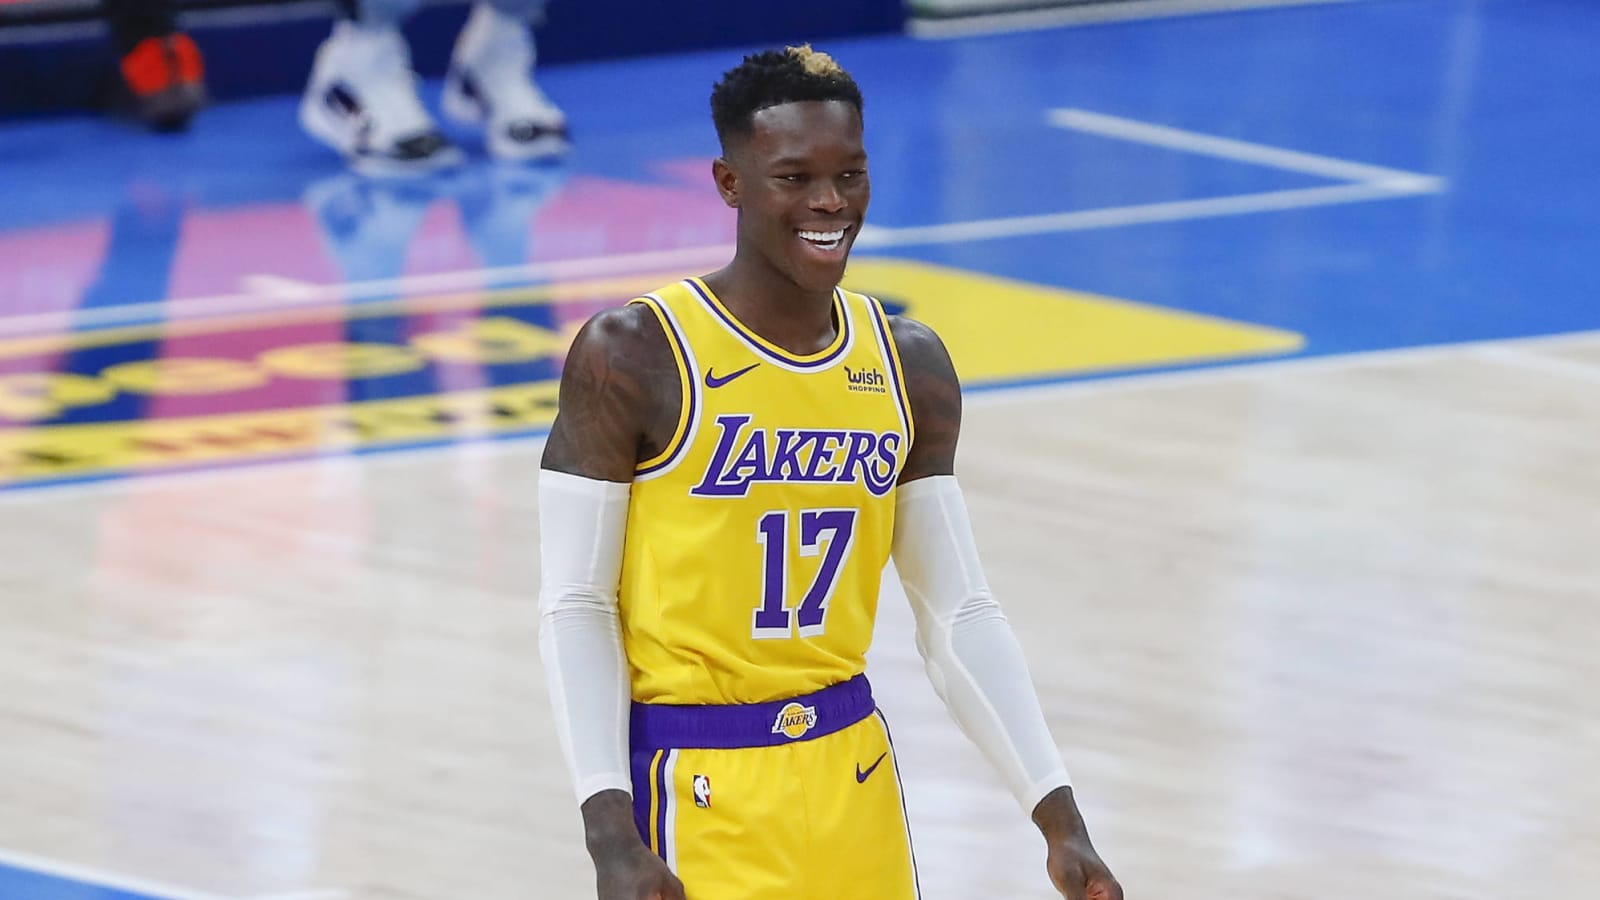 Lakers' Schroder reportedly expecting $100M-$120M contract